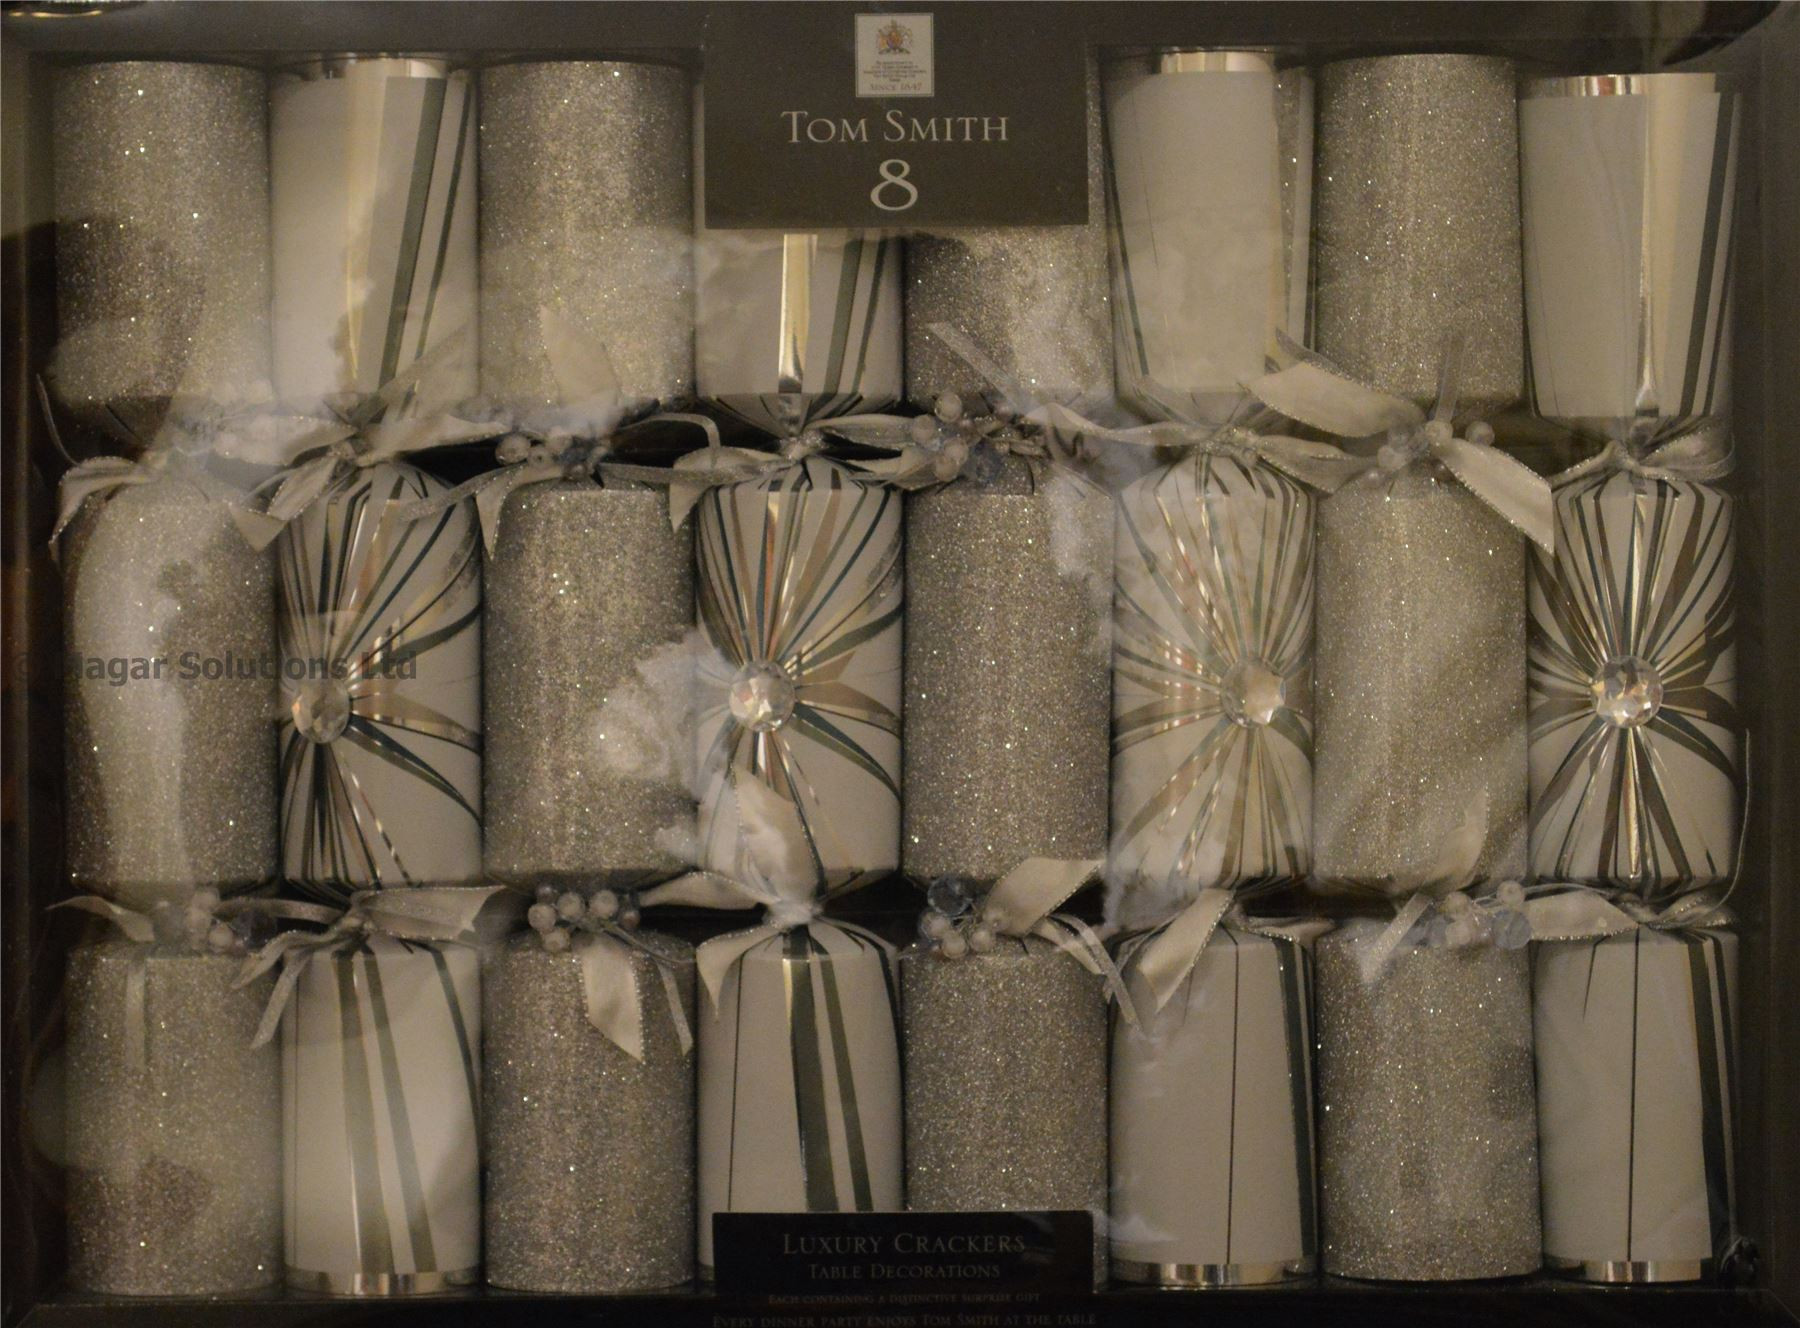 Tom Smith Christmas Crackers
 Tom Smith Luxury Christmas Party Crackers Silver Plated